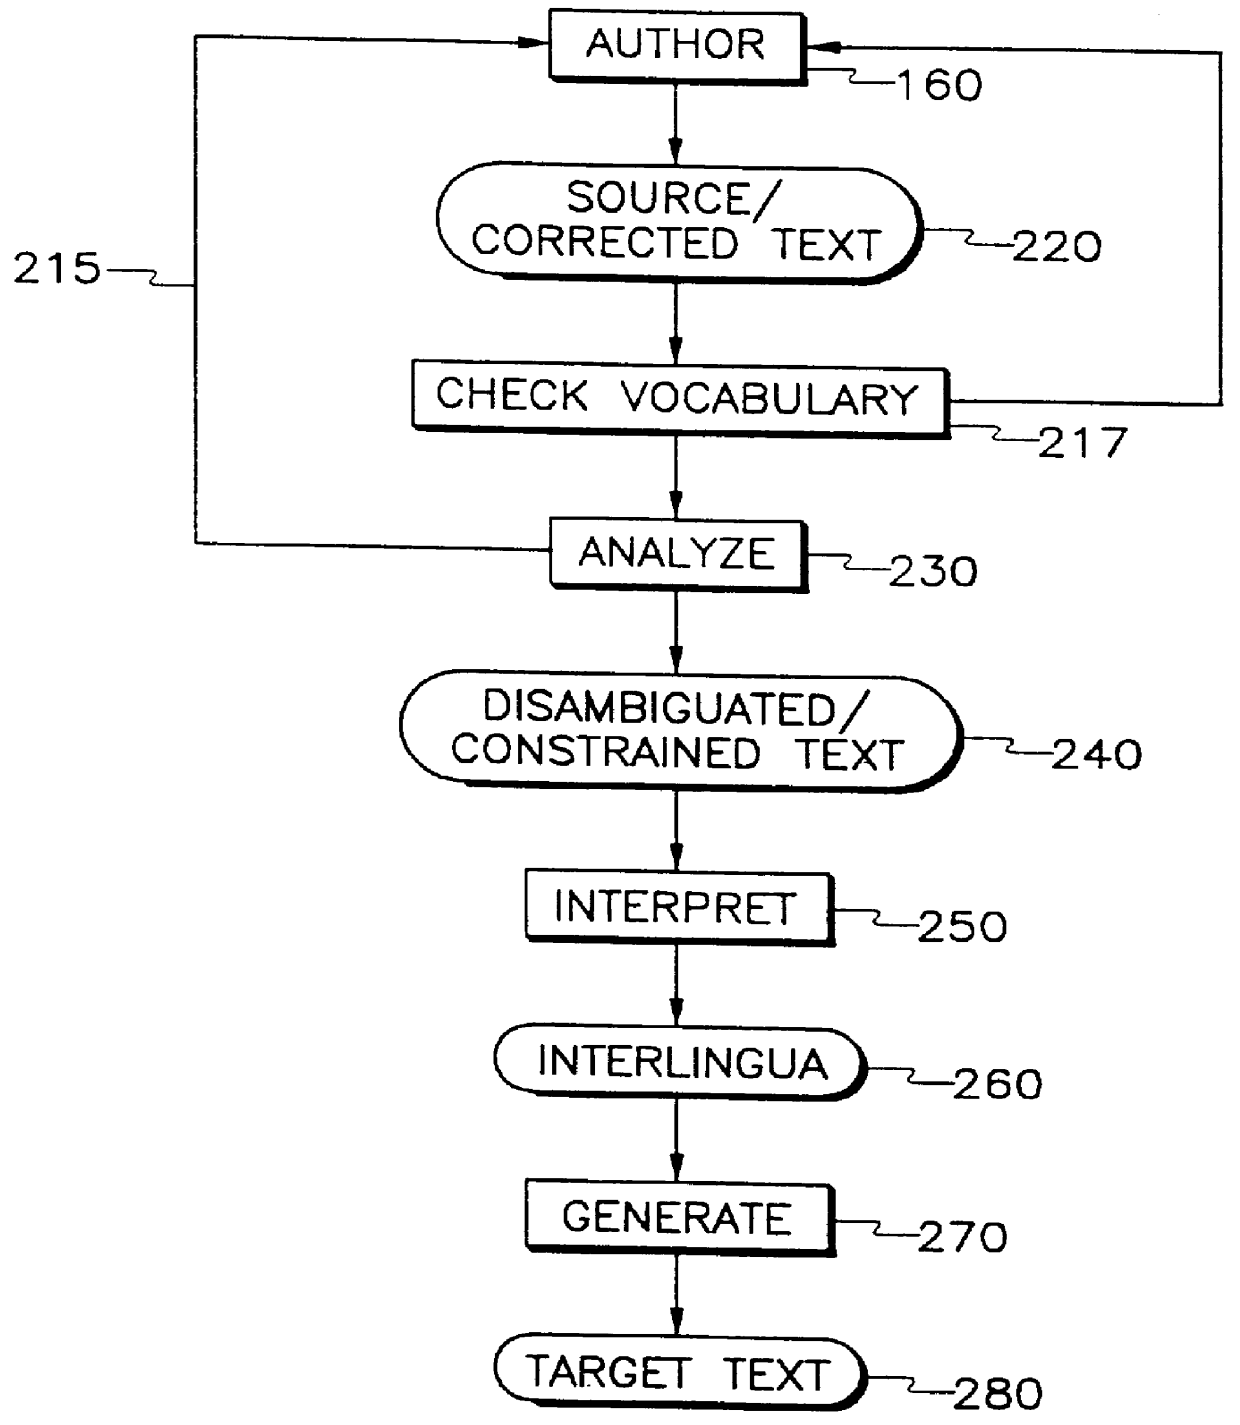 Integrated authoring and translation system